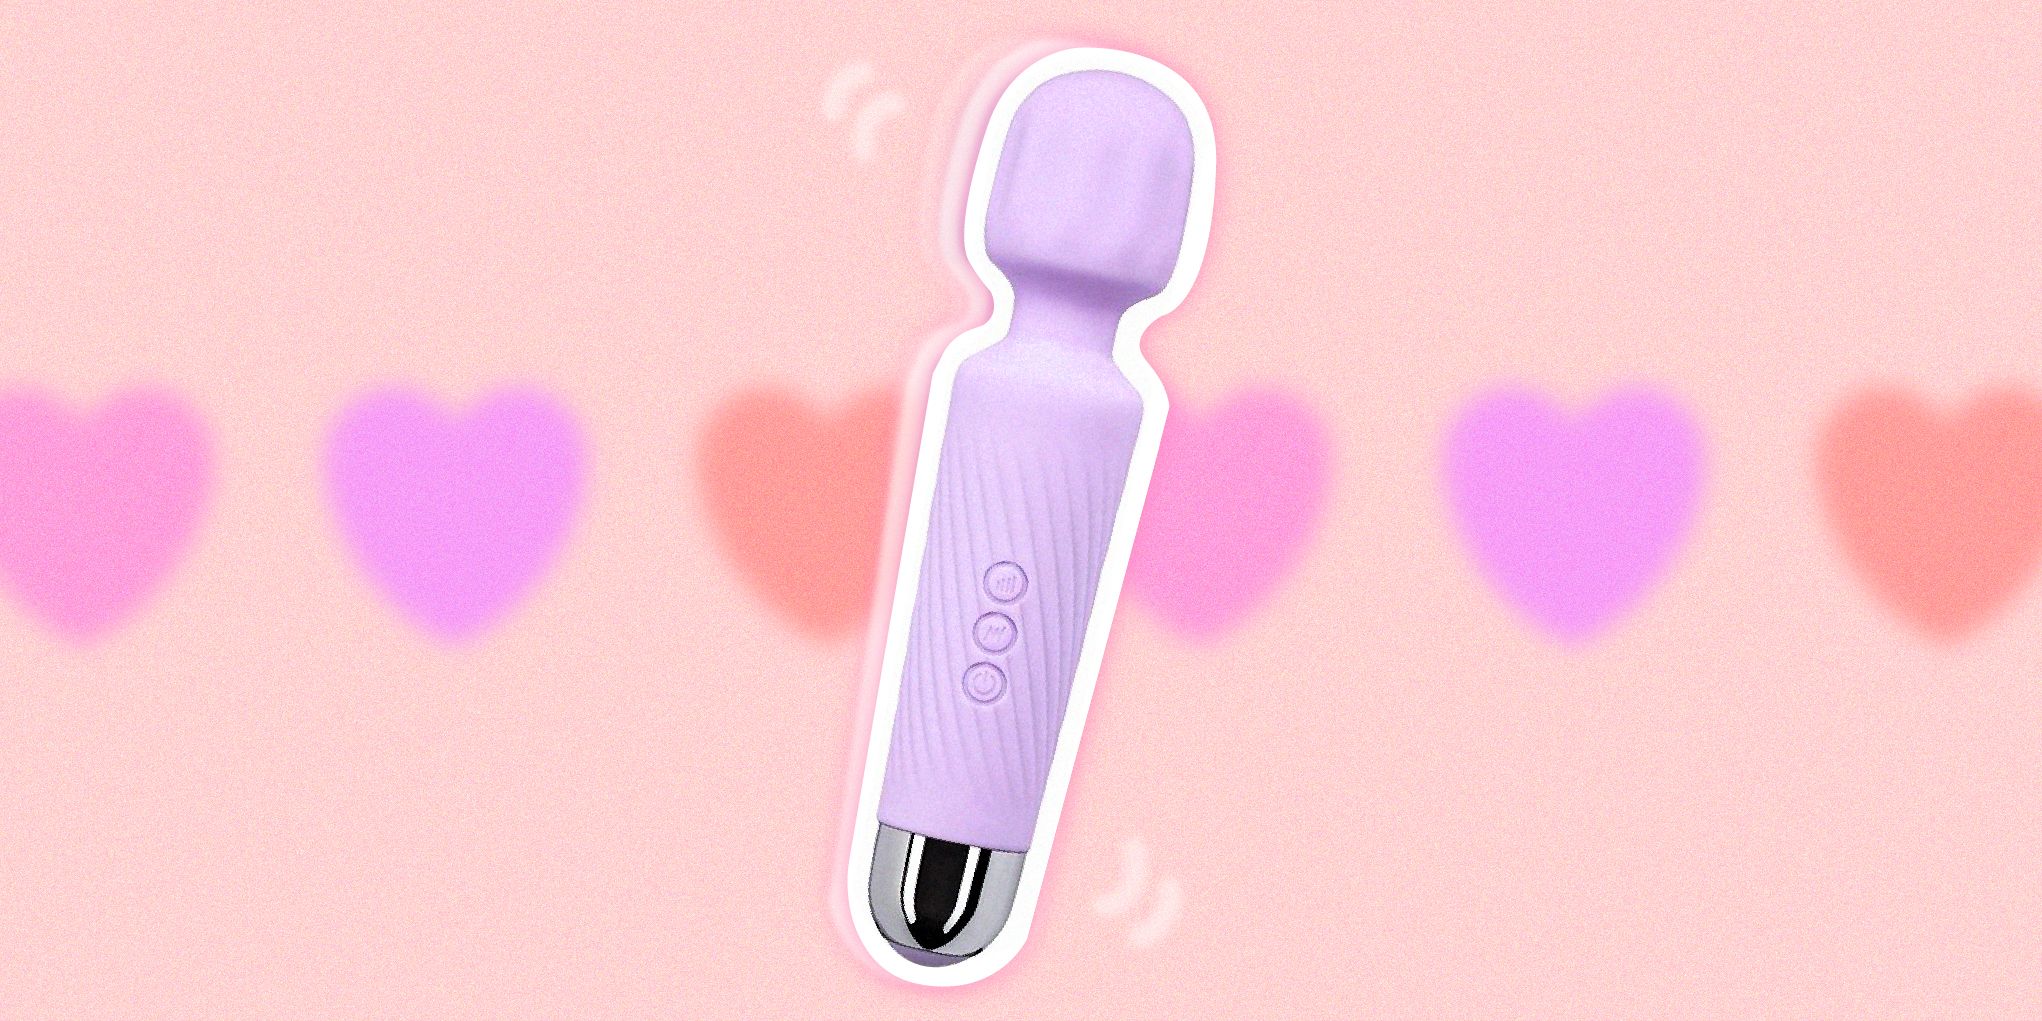 Things You Can Use As A Dildo